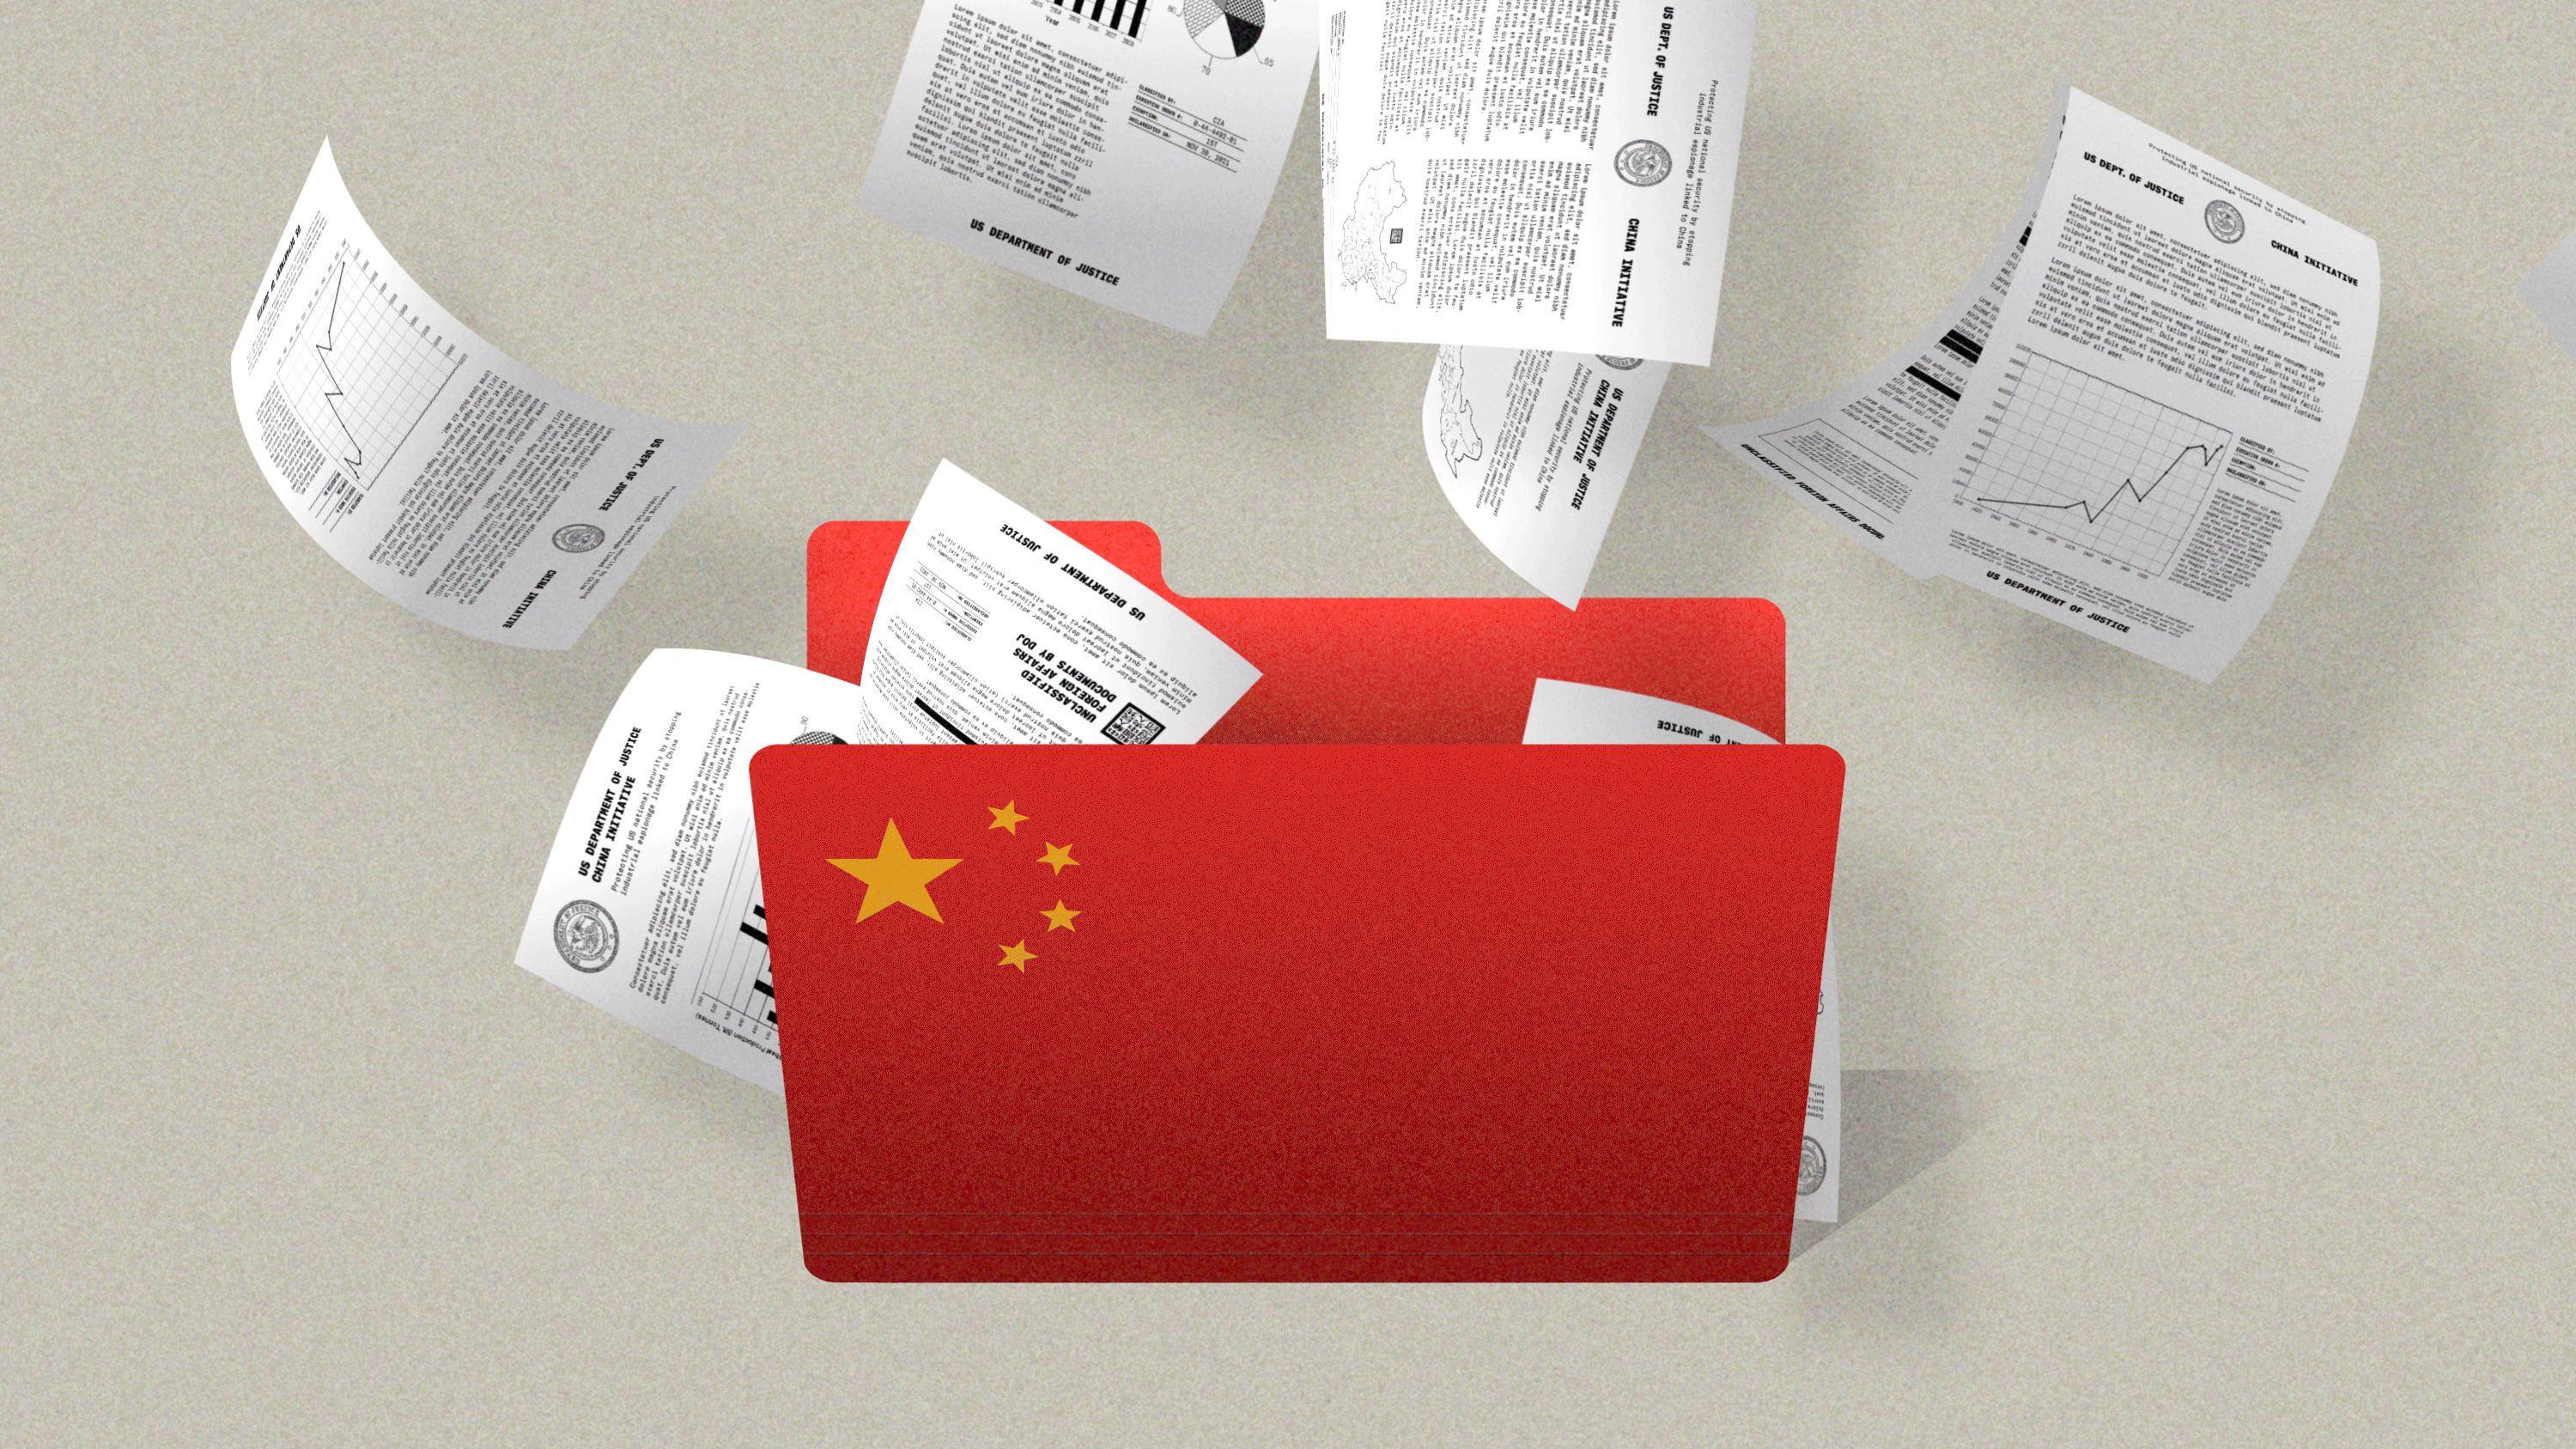 Conceptual illustration showing a file folder with the China flag and various papers flying out of it